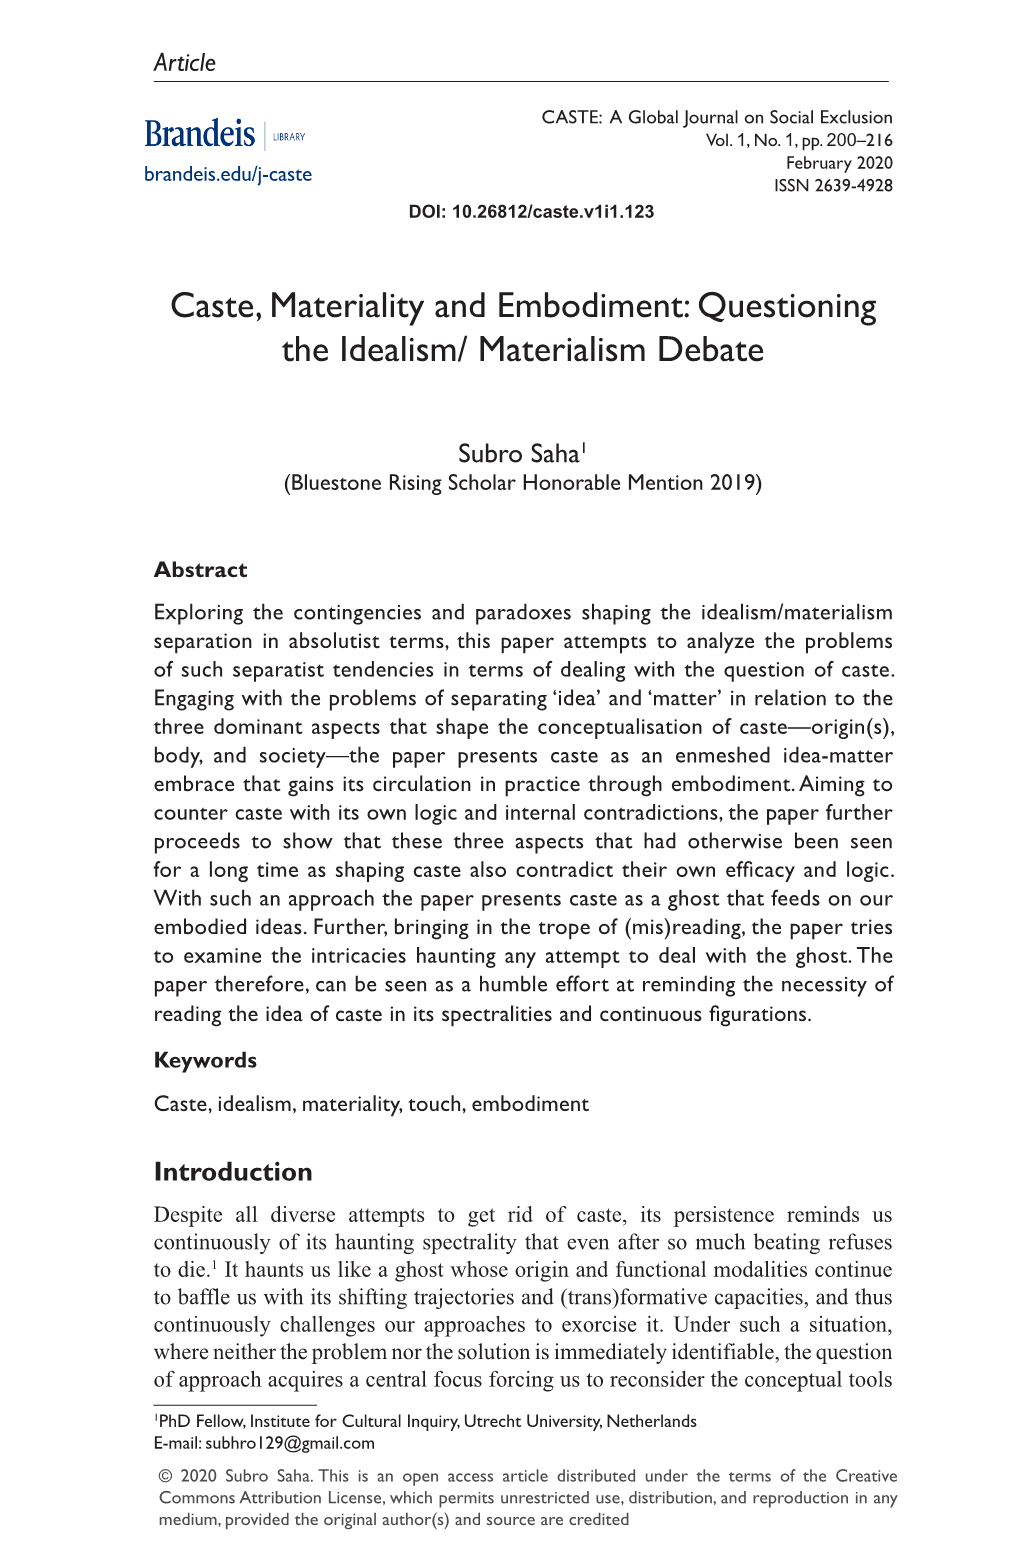 Caste, Materiality and Embodiment: Questioning the Idealism/ Materialism Debate